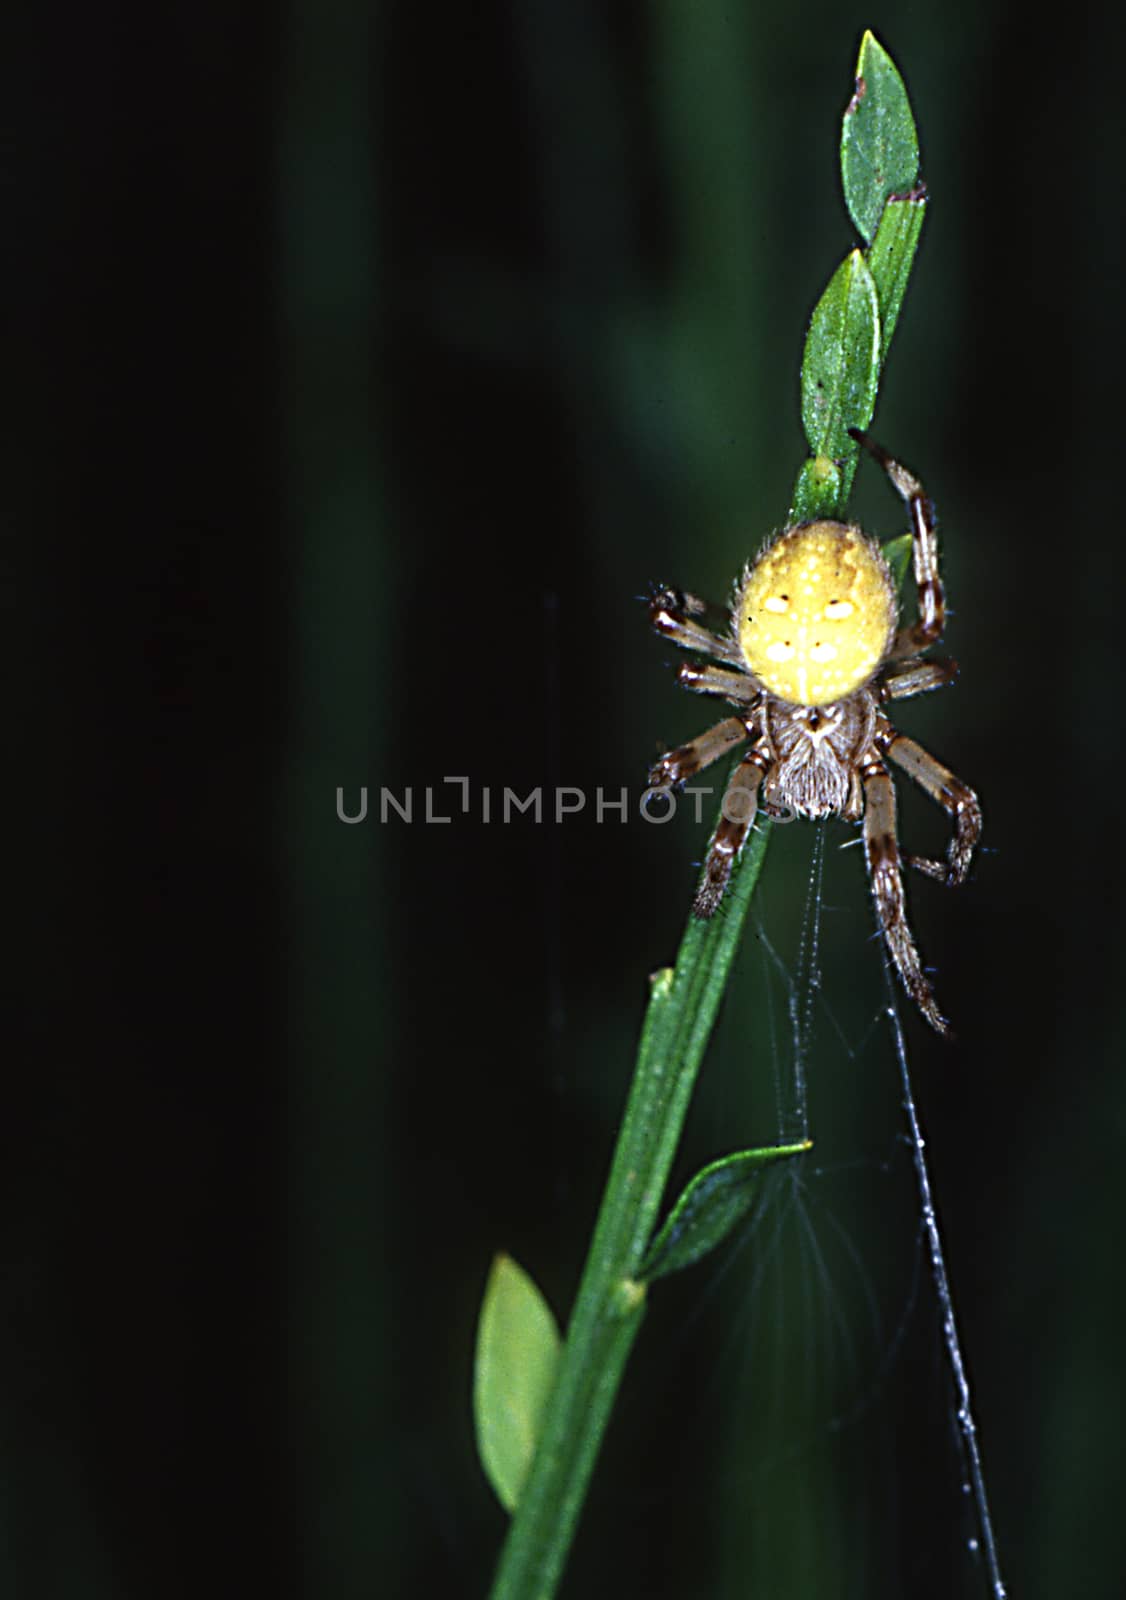 four-spotted garden spider lying in wait by Dr-Lange